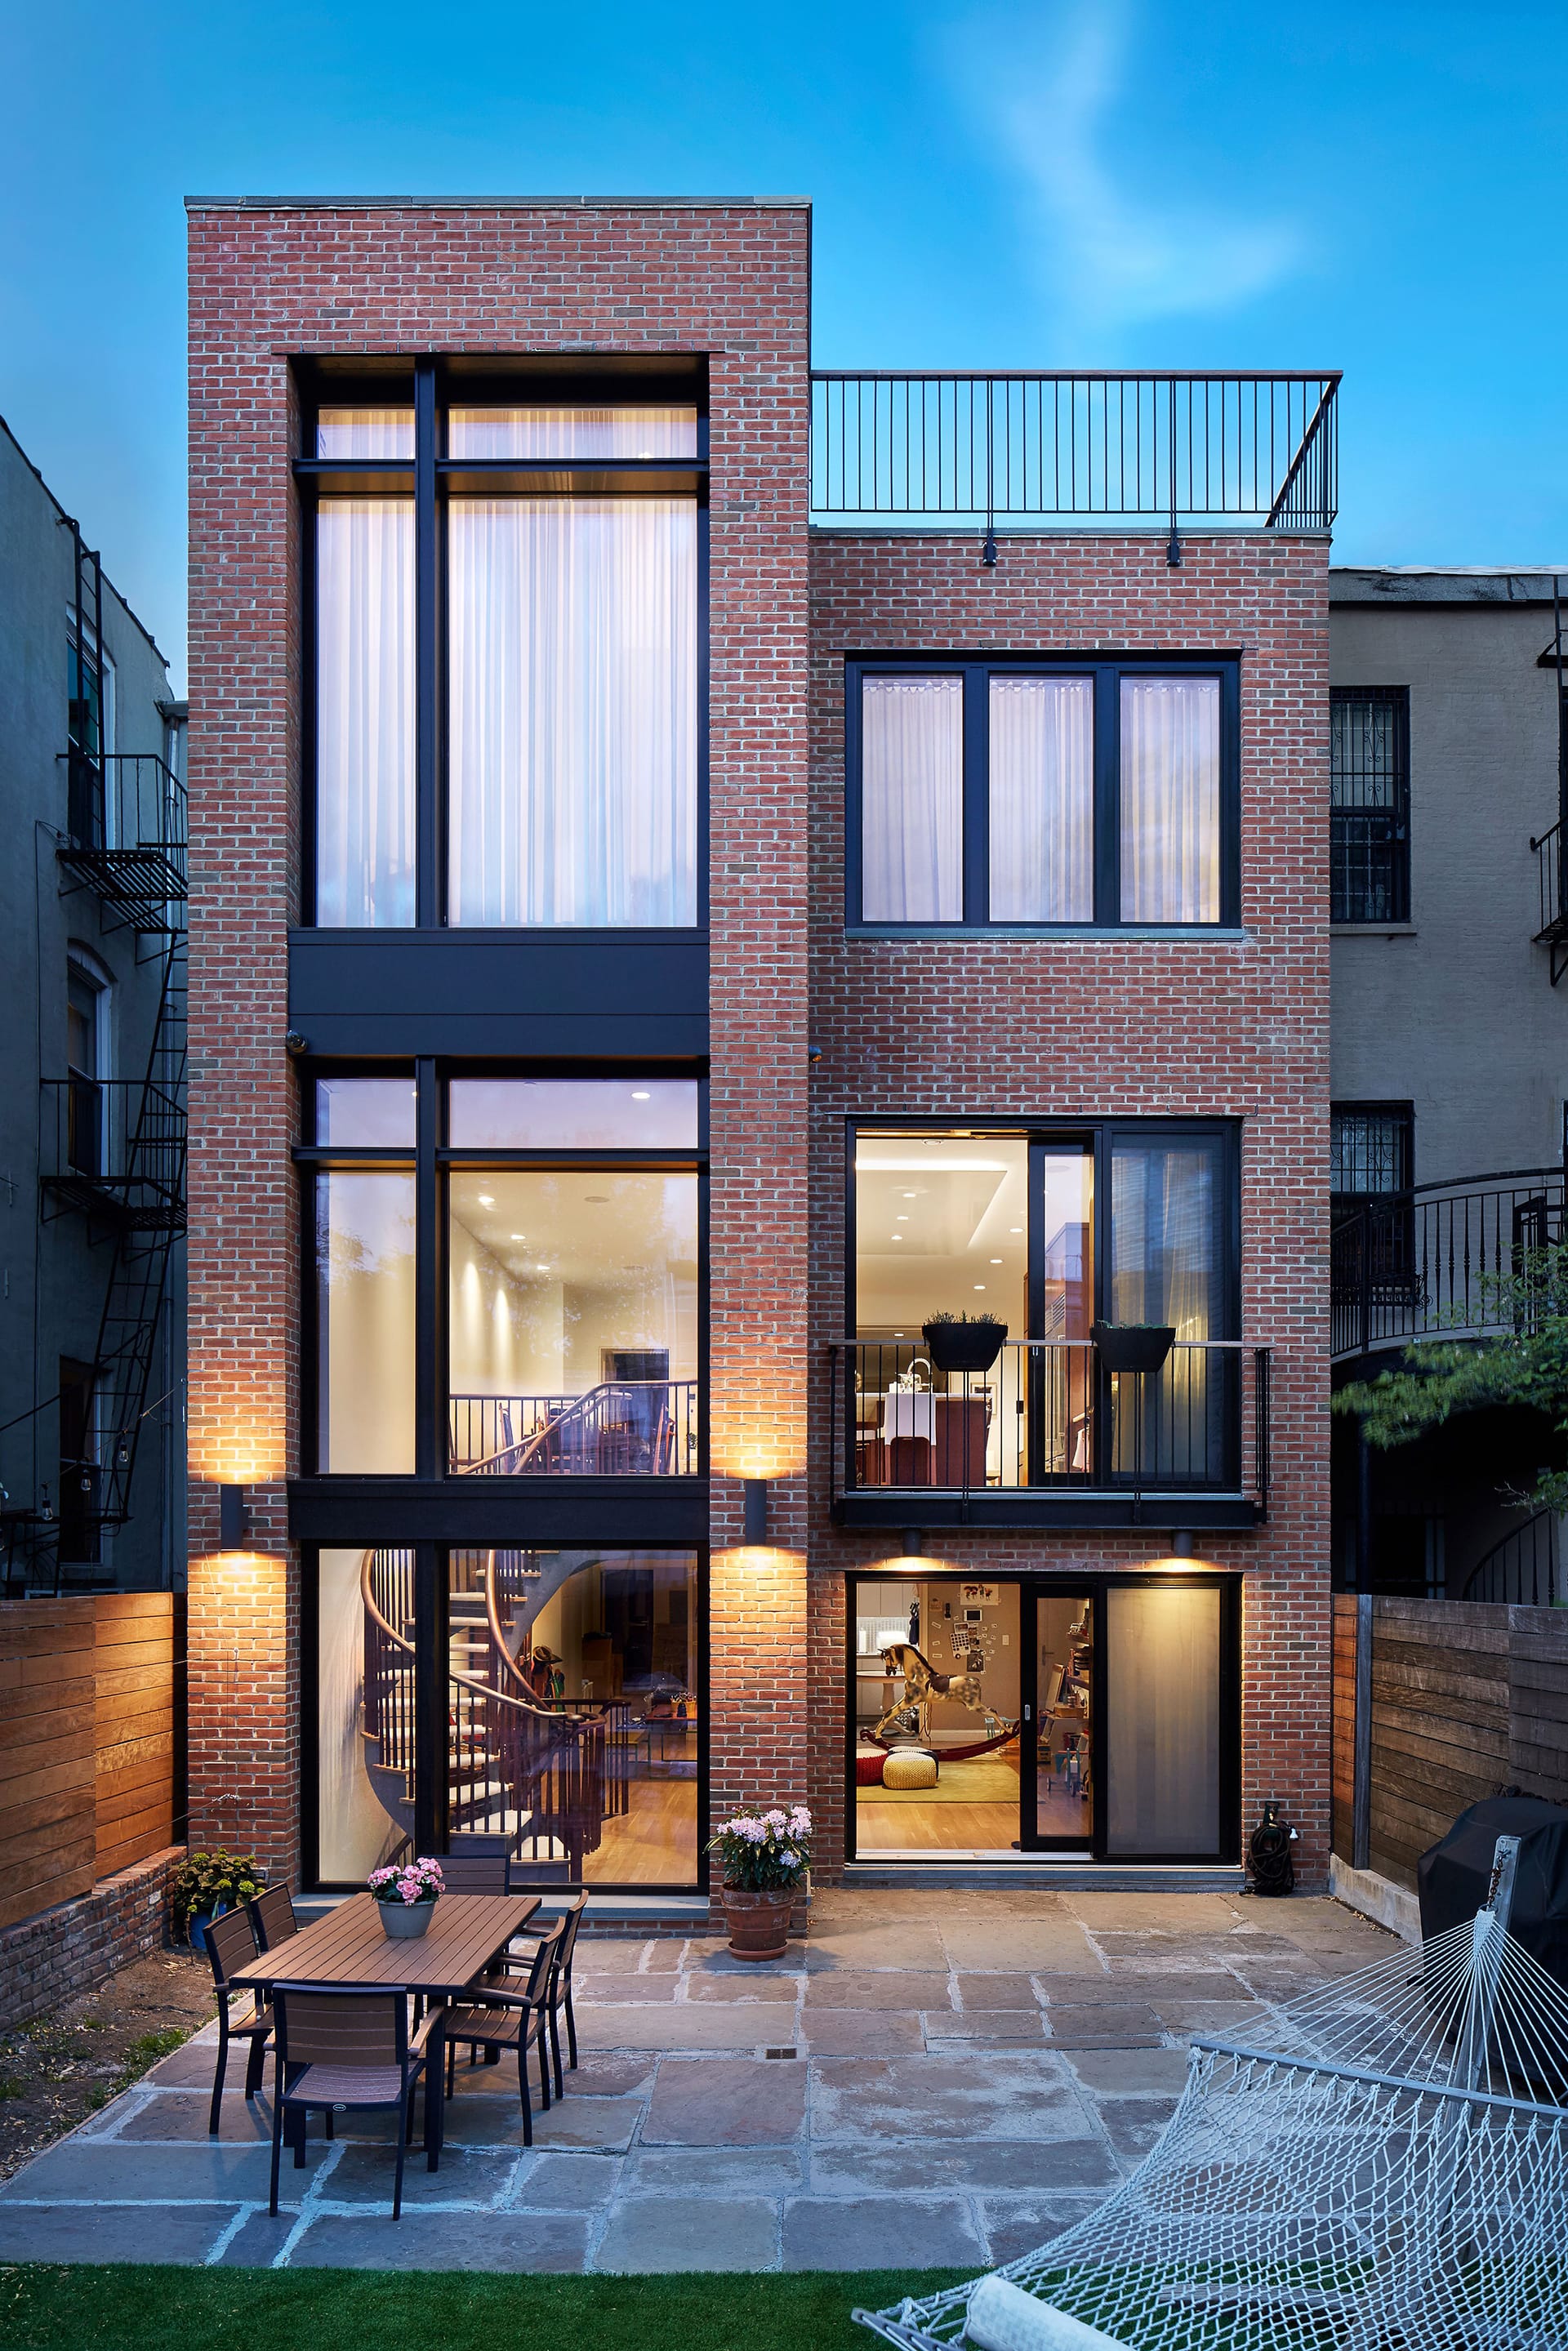 Rear facade of a Carroll Gardens Passive House with three stories of glass on the left side, and large expanses of glass at the right. Atop the right side of the building, railing creates a barrier for the roofdeck. Stone pavers separate the grass from a dining area with a hammock in the back yard.